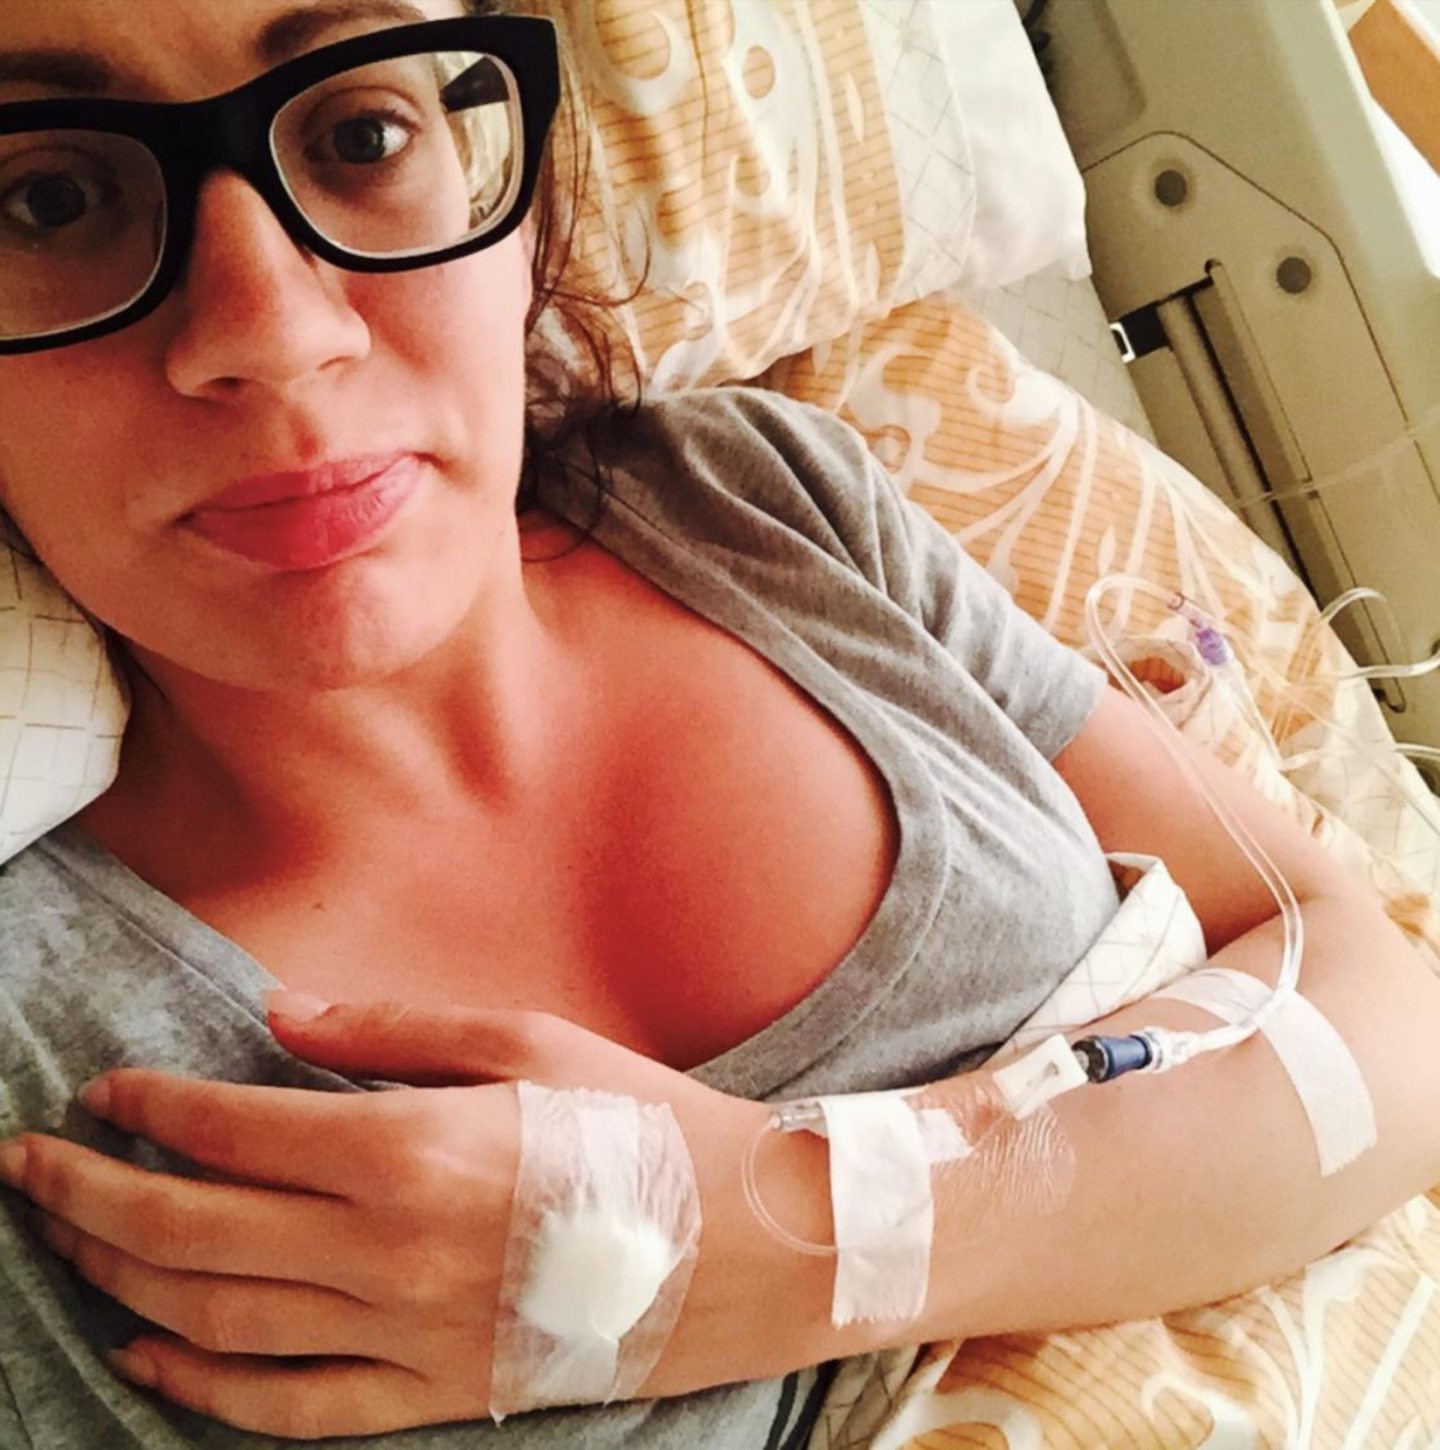 Gemma was hospitalised while travelling in Thailand because of her gut problems. Image: Gemma Stuart / Gut Wealth